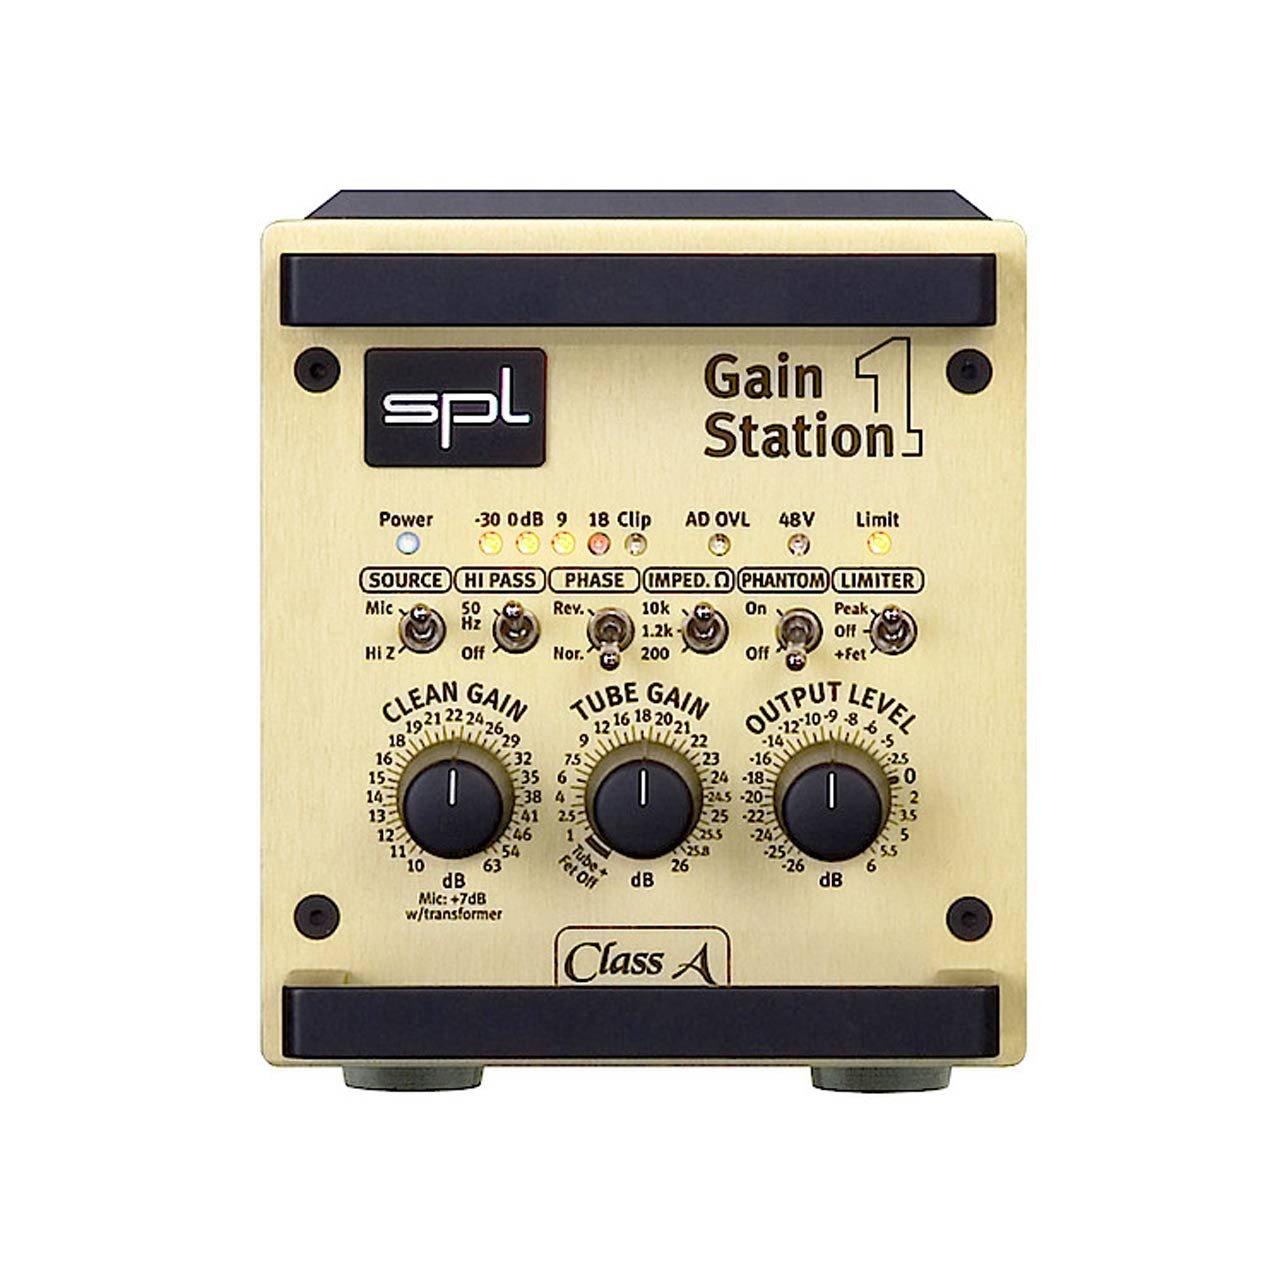 Preamps/Channel Strips - SPL GainStation 1 Microphone And Instrument Preamplifier